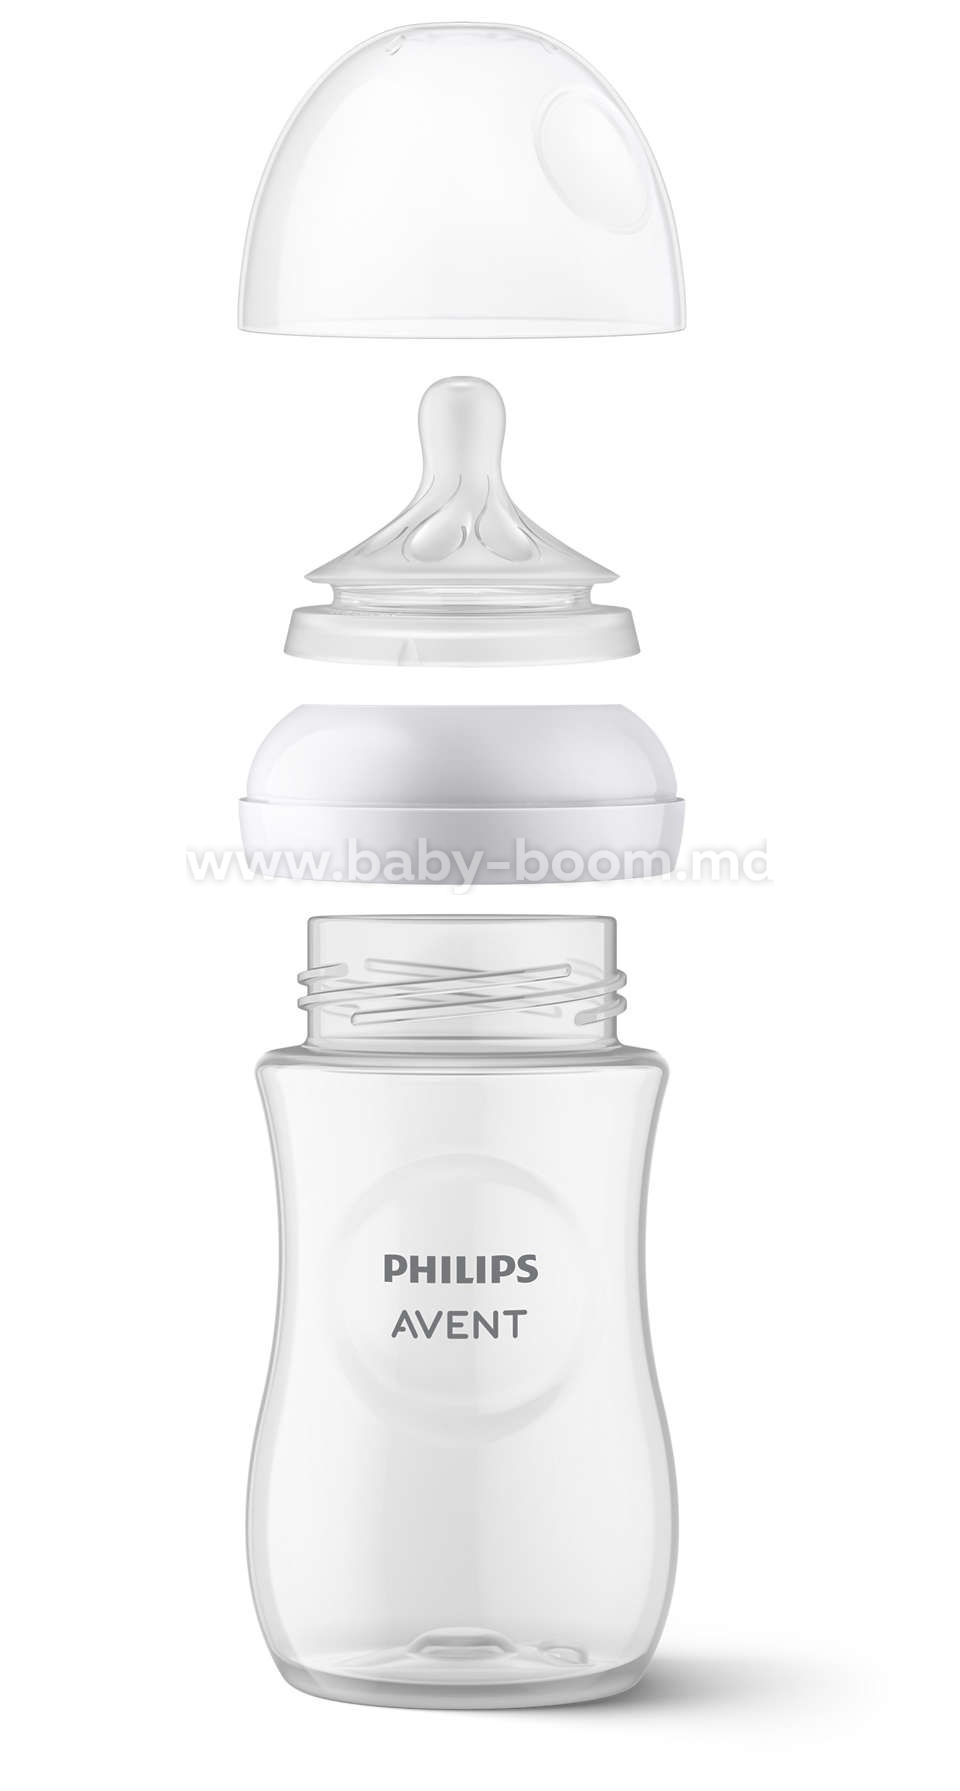 Philips Avent Sucette +6m Air Night Boy - Babyboom Shop